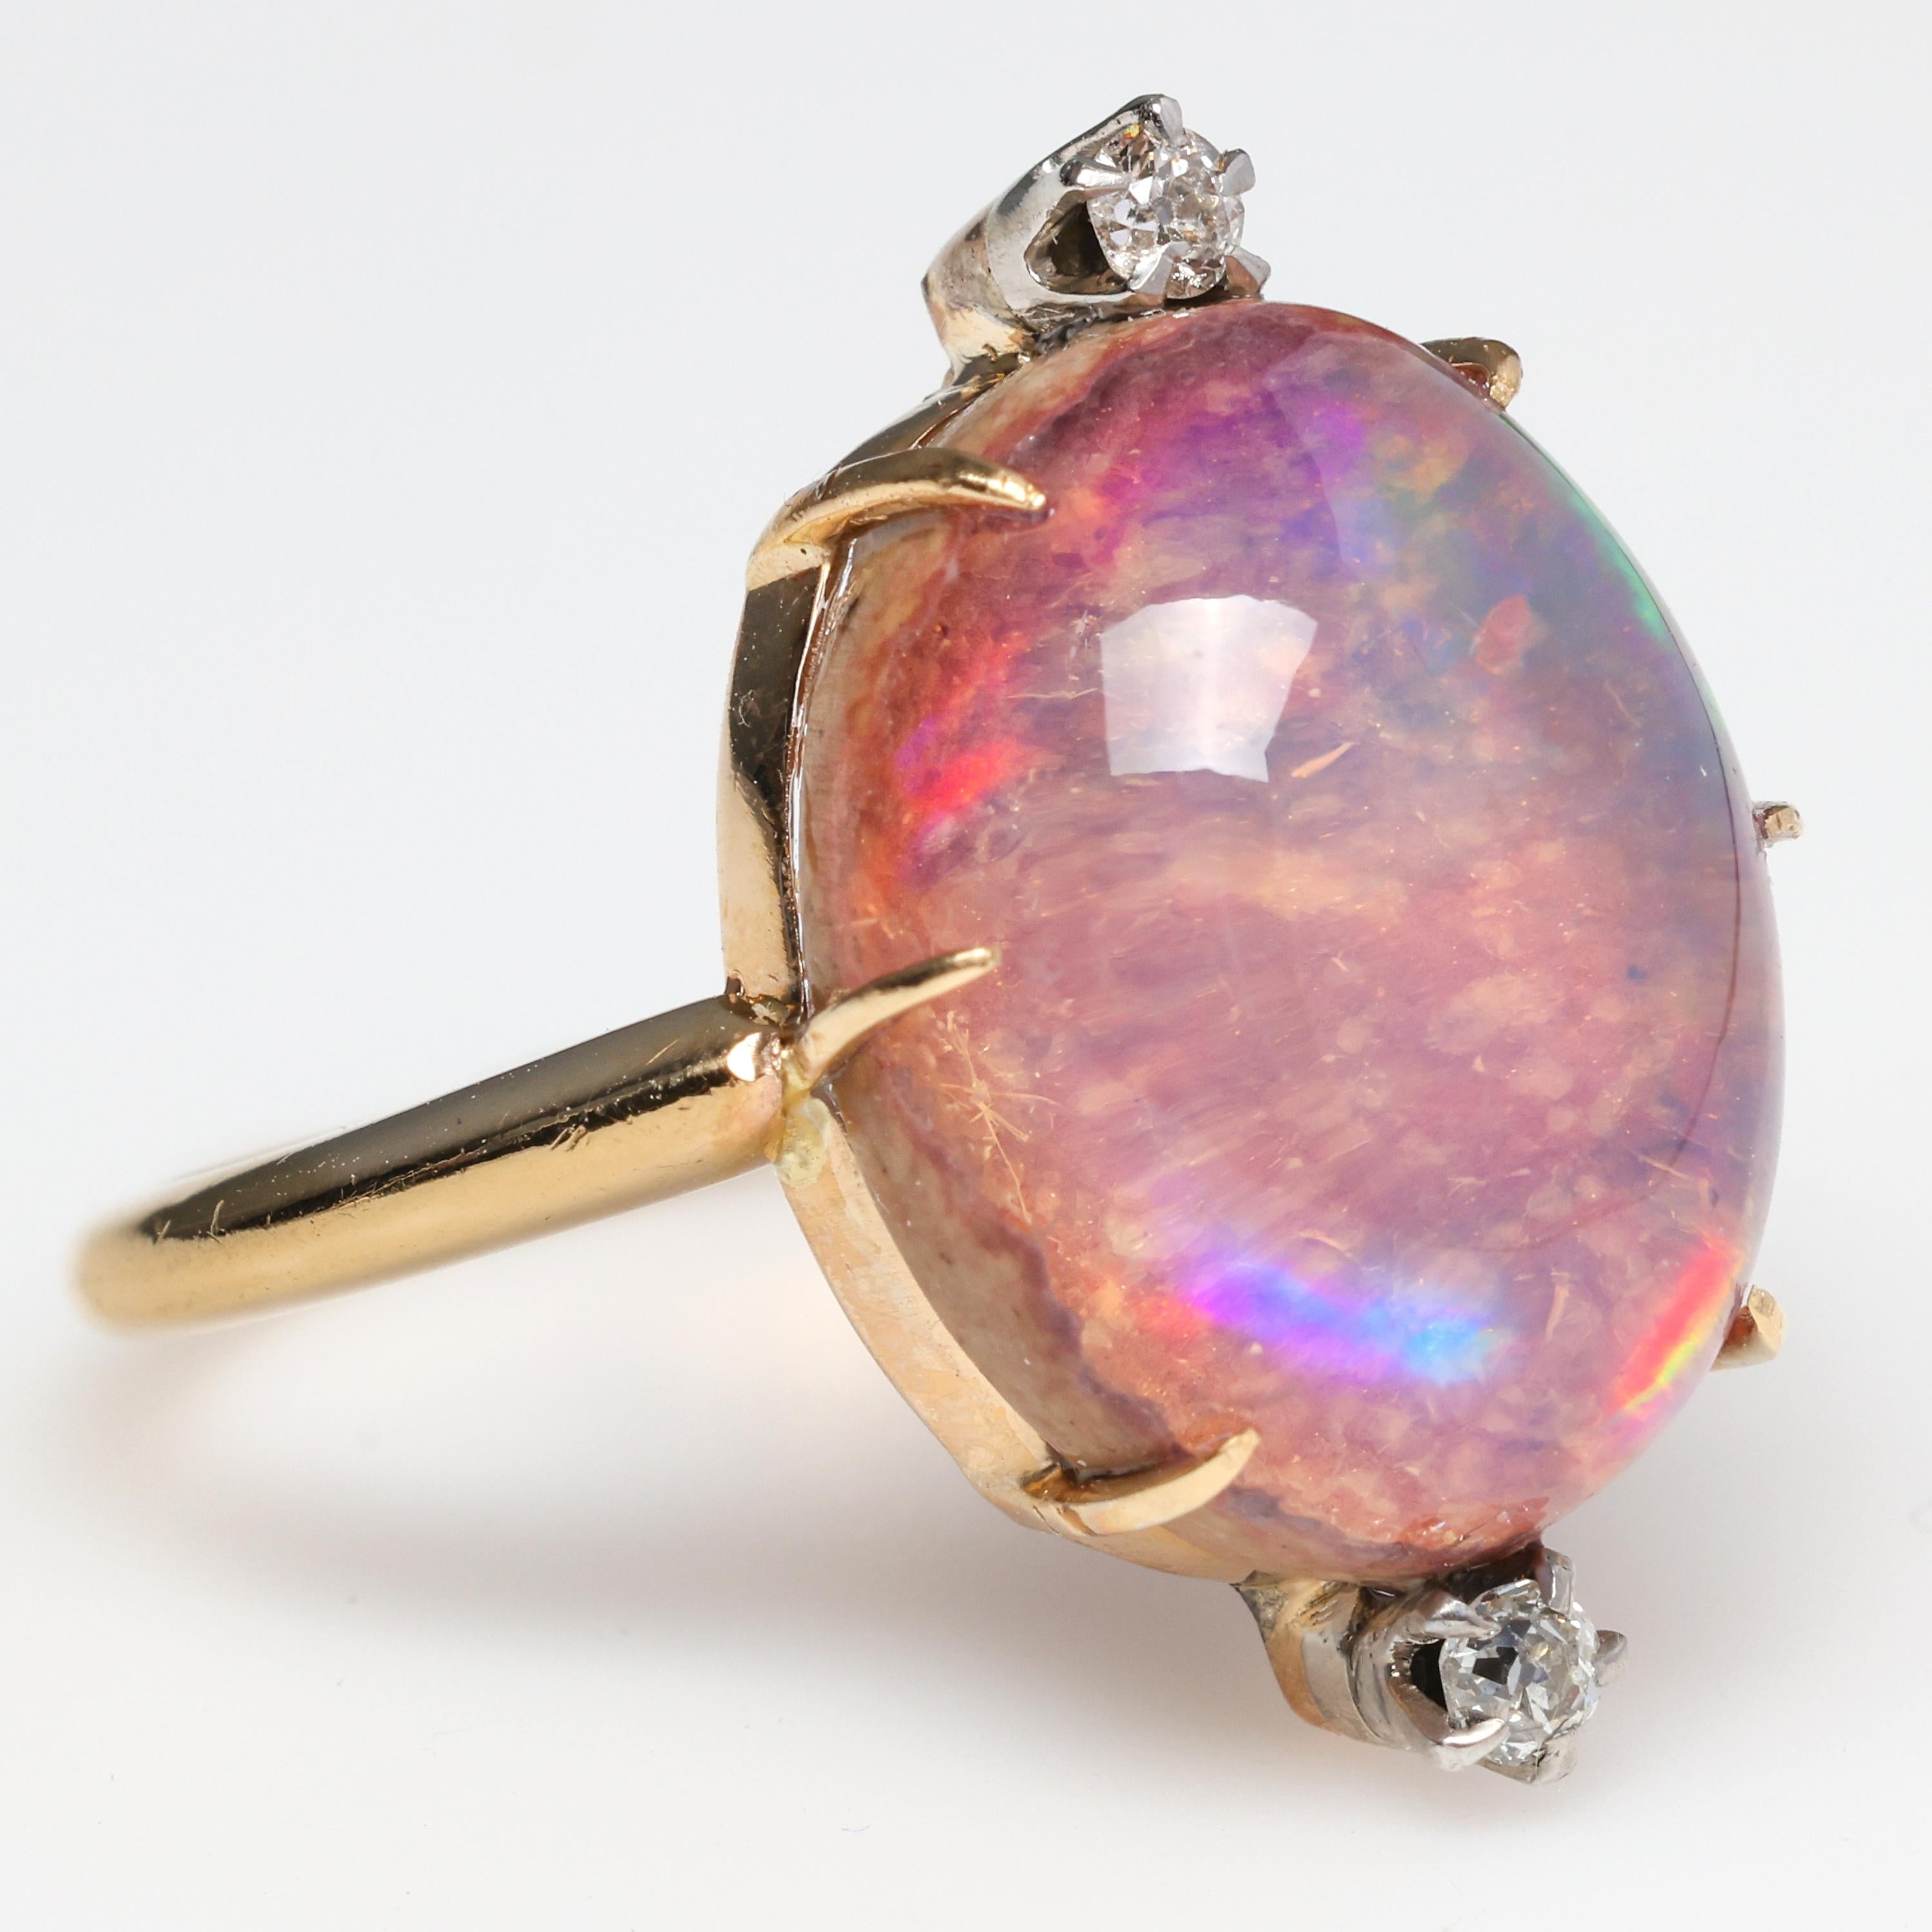 Beguiling and magical, this spectacular Victorian-era unisex ring (circa the 1890s) features a 17.3 x 13.4 x 9.31mm Type II (Boulder) precious opal that the gem lab has identified as Mexican in origin. Of all the opals in my collection, this one is